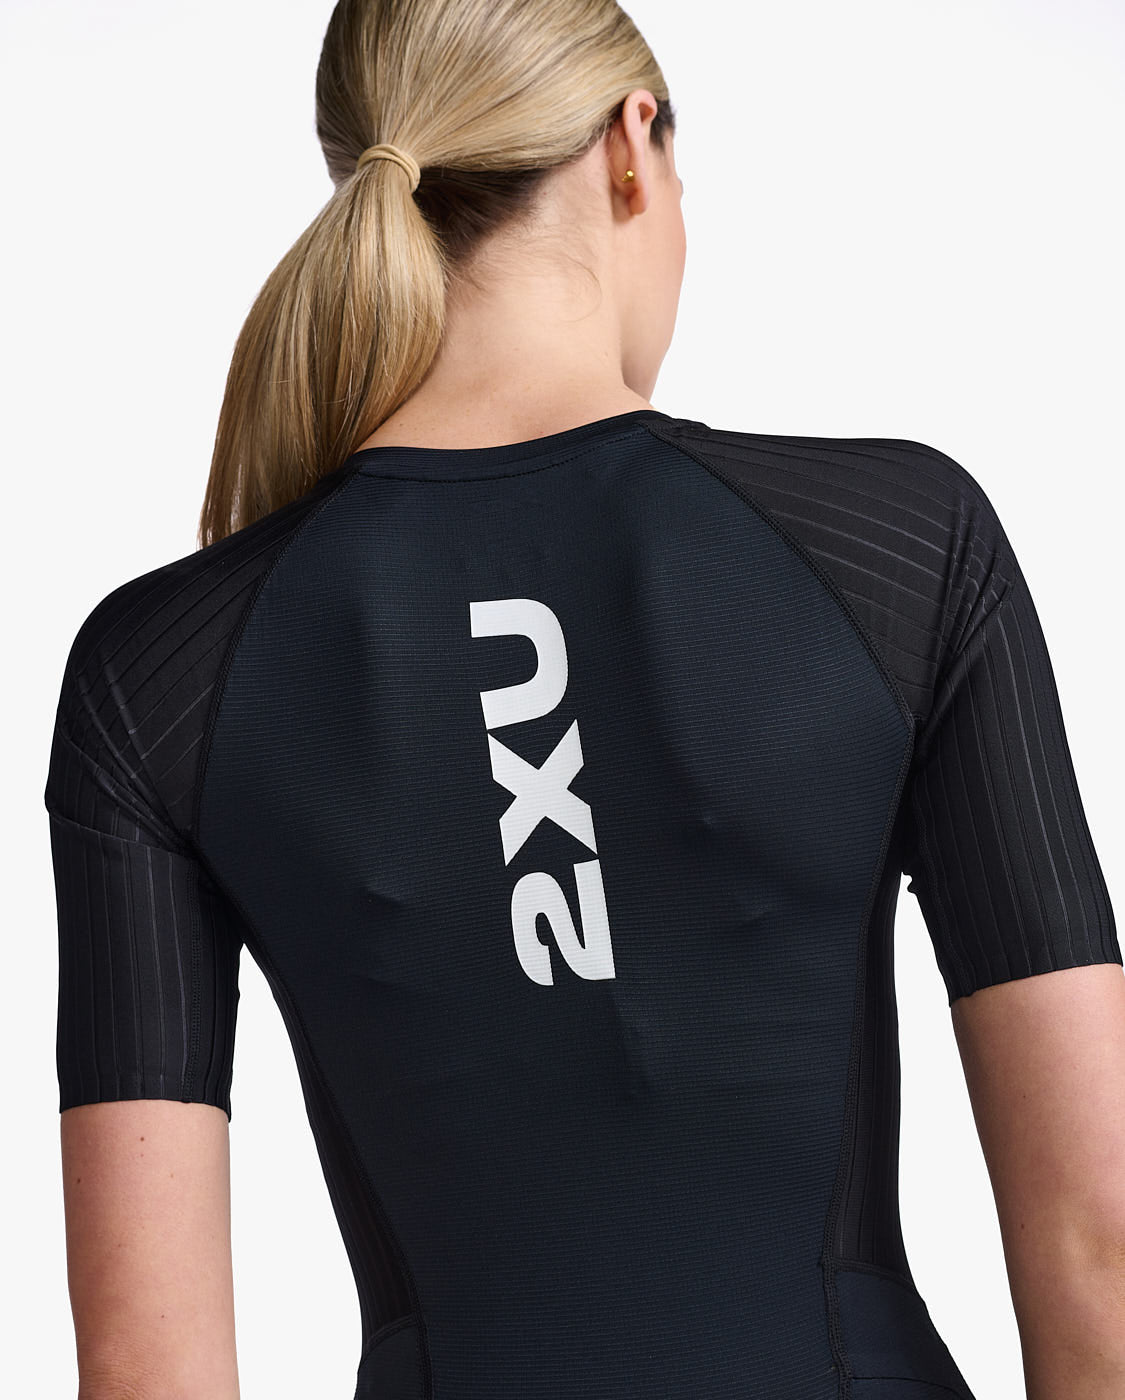 2XU South Africa - Womens Aero Sleeved Trisuit - BLK/WHT